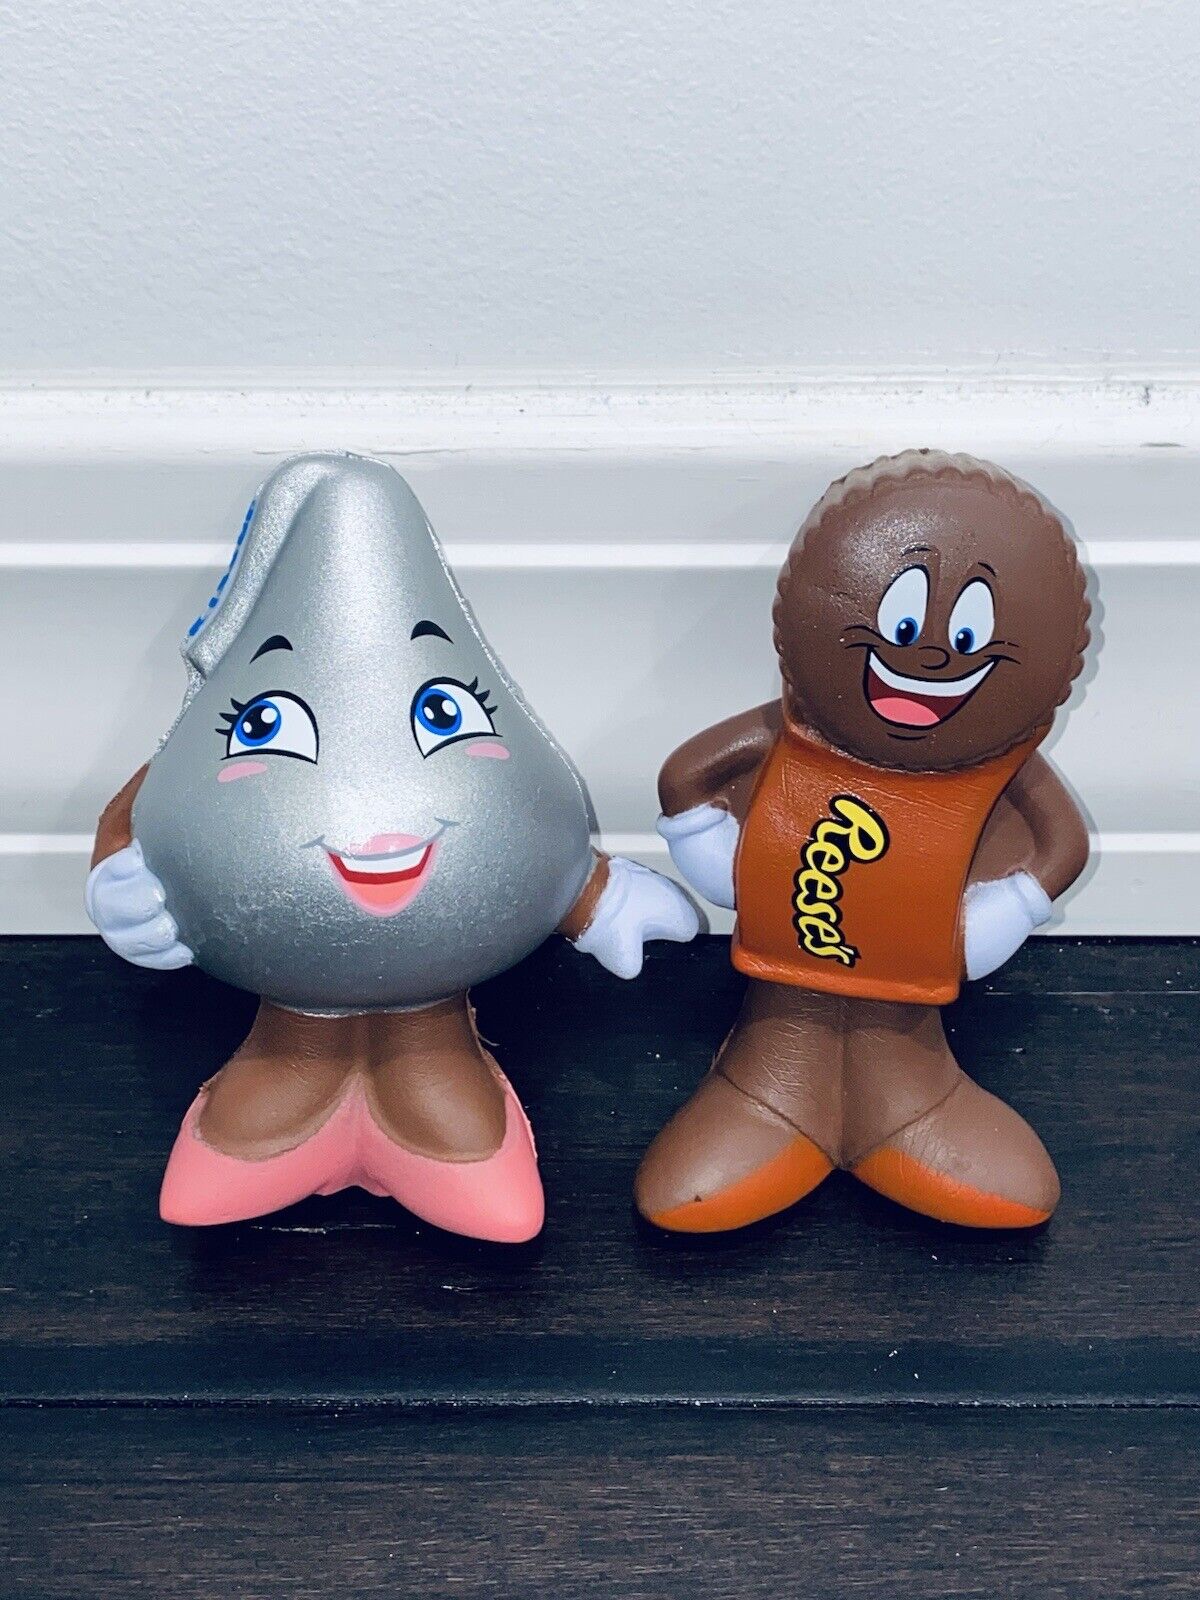 x2 Hershey Stress Reliever Toy Mascot Chocolate Bar & Kiss Souvenir Park Gifts